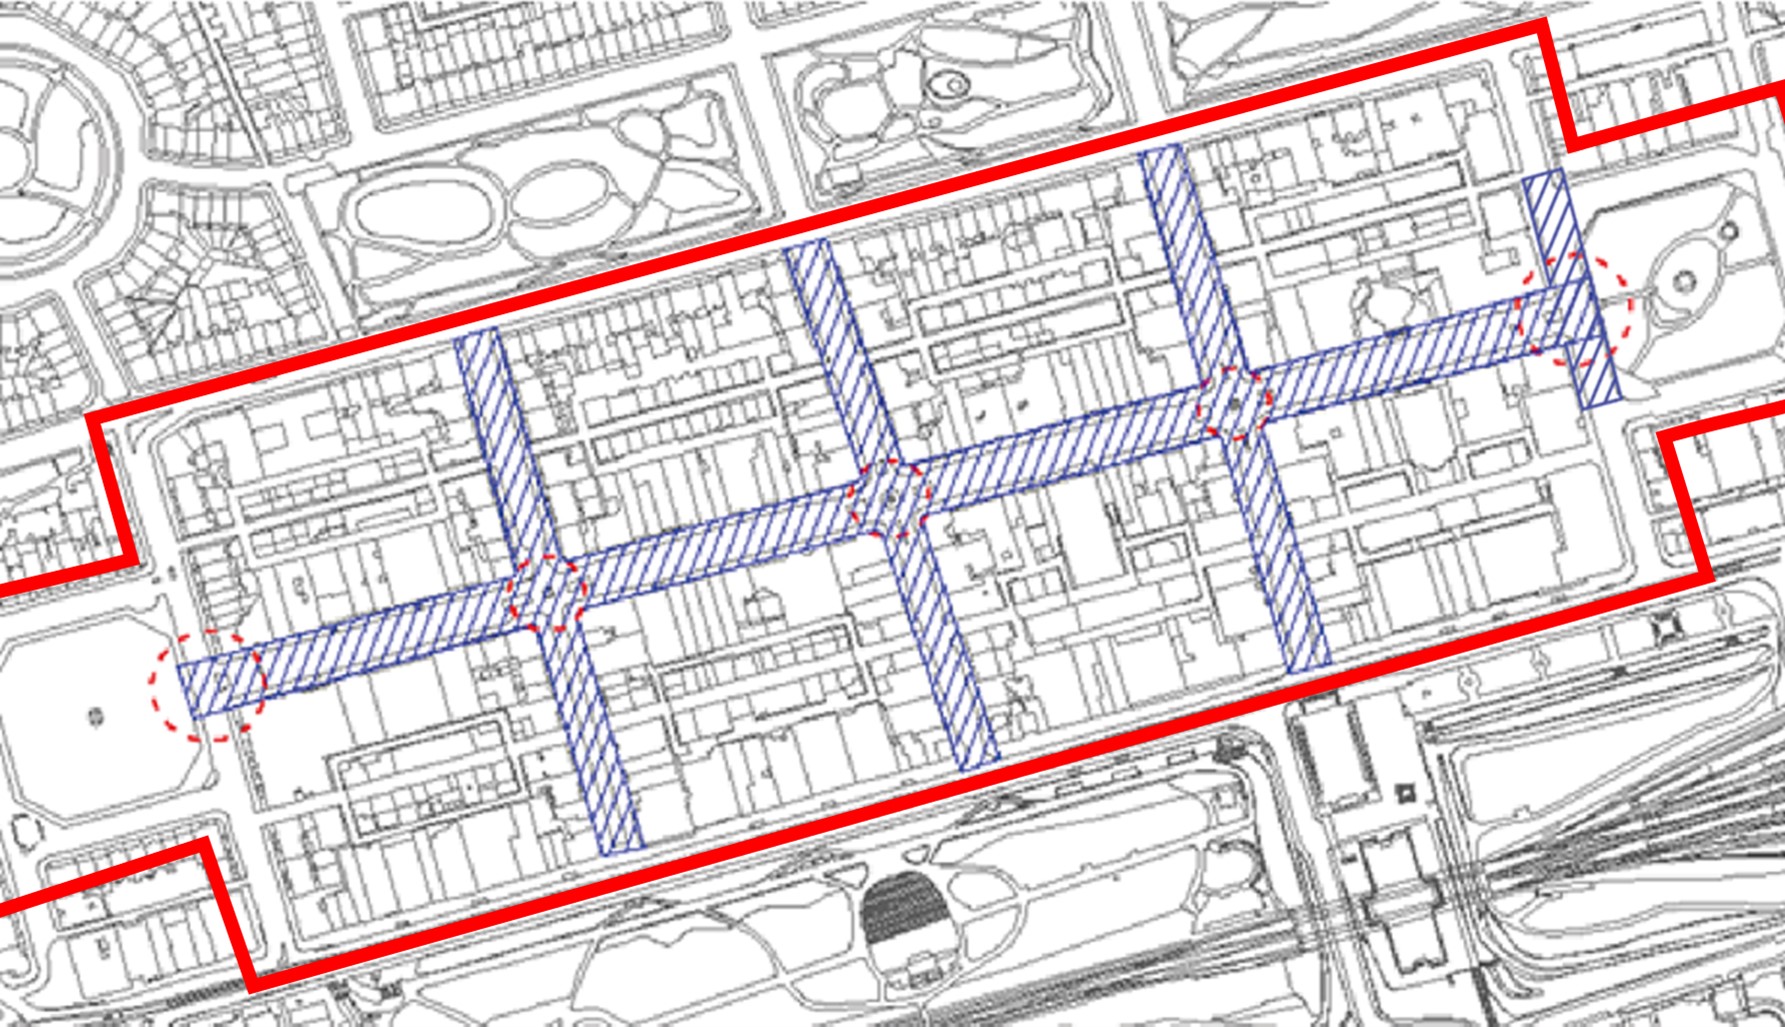 George Street, including the squares at either end, highlighted